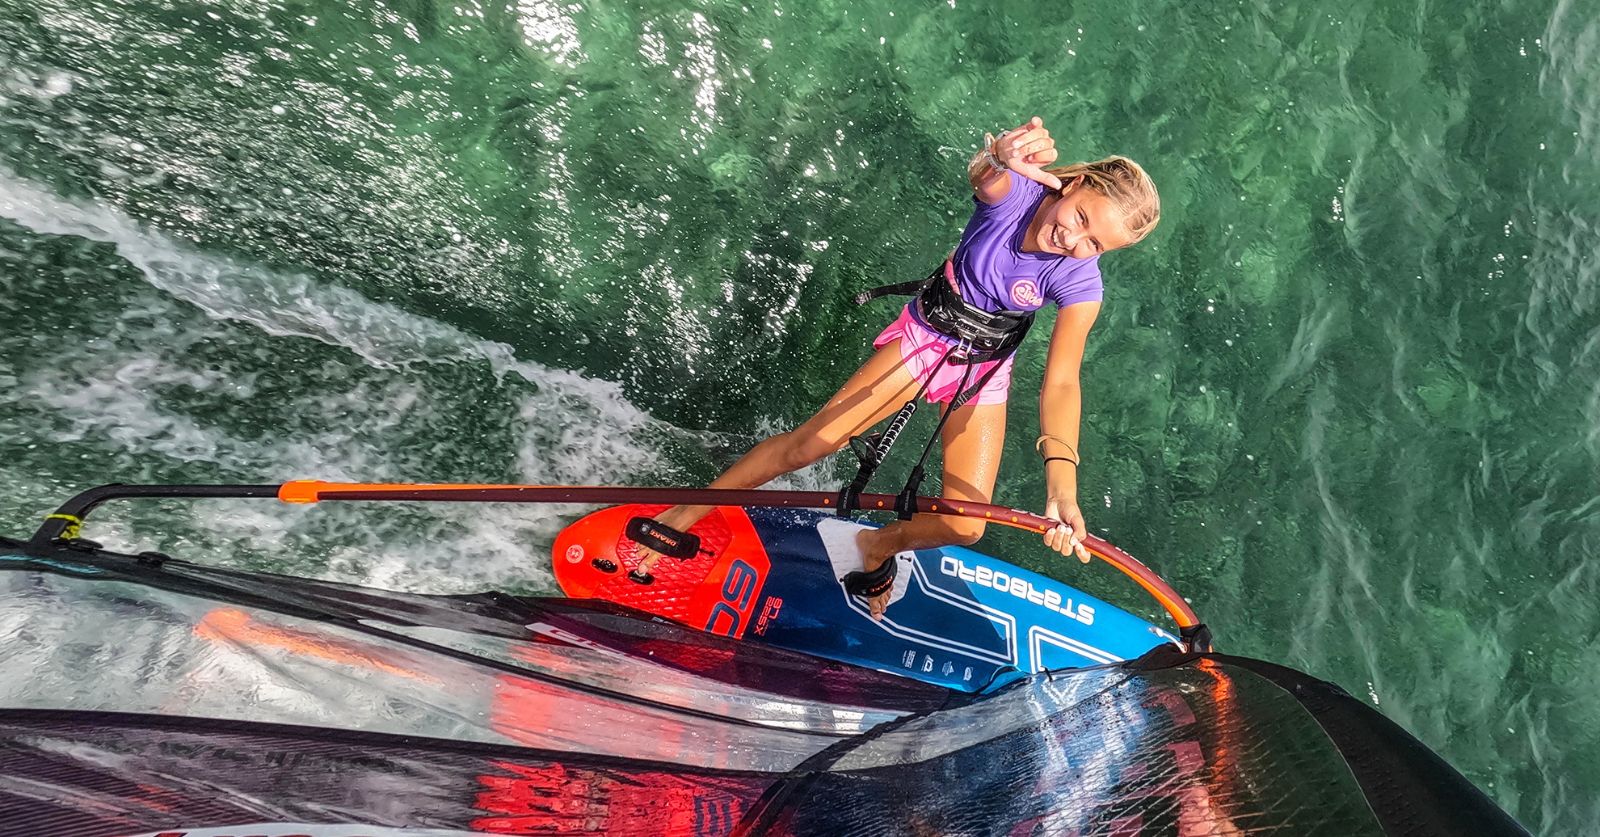 5 reasons why you should start windsurfing